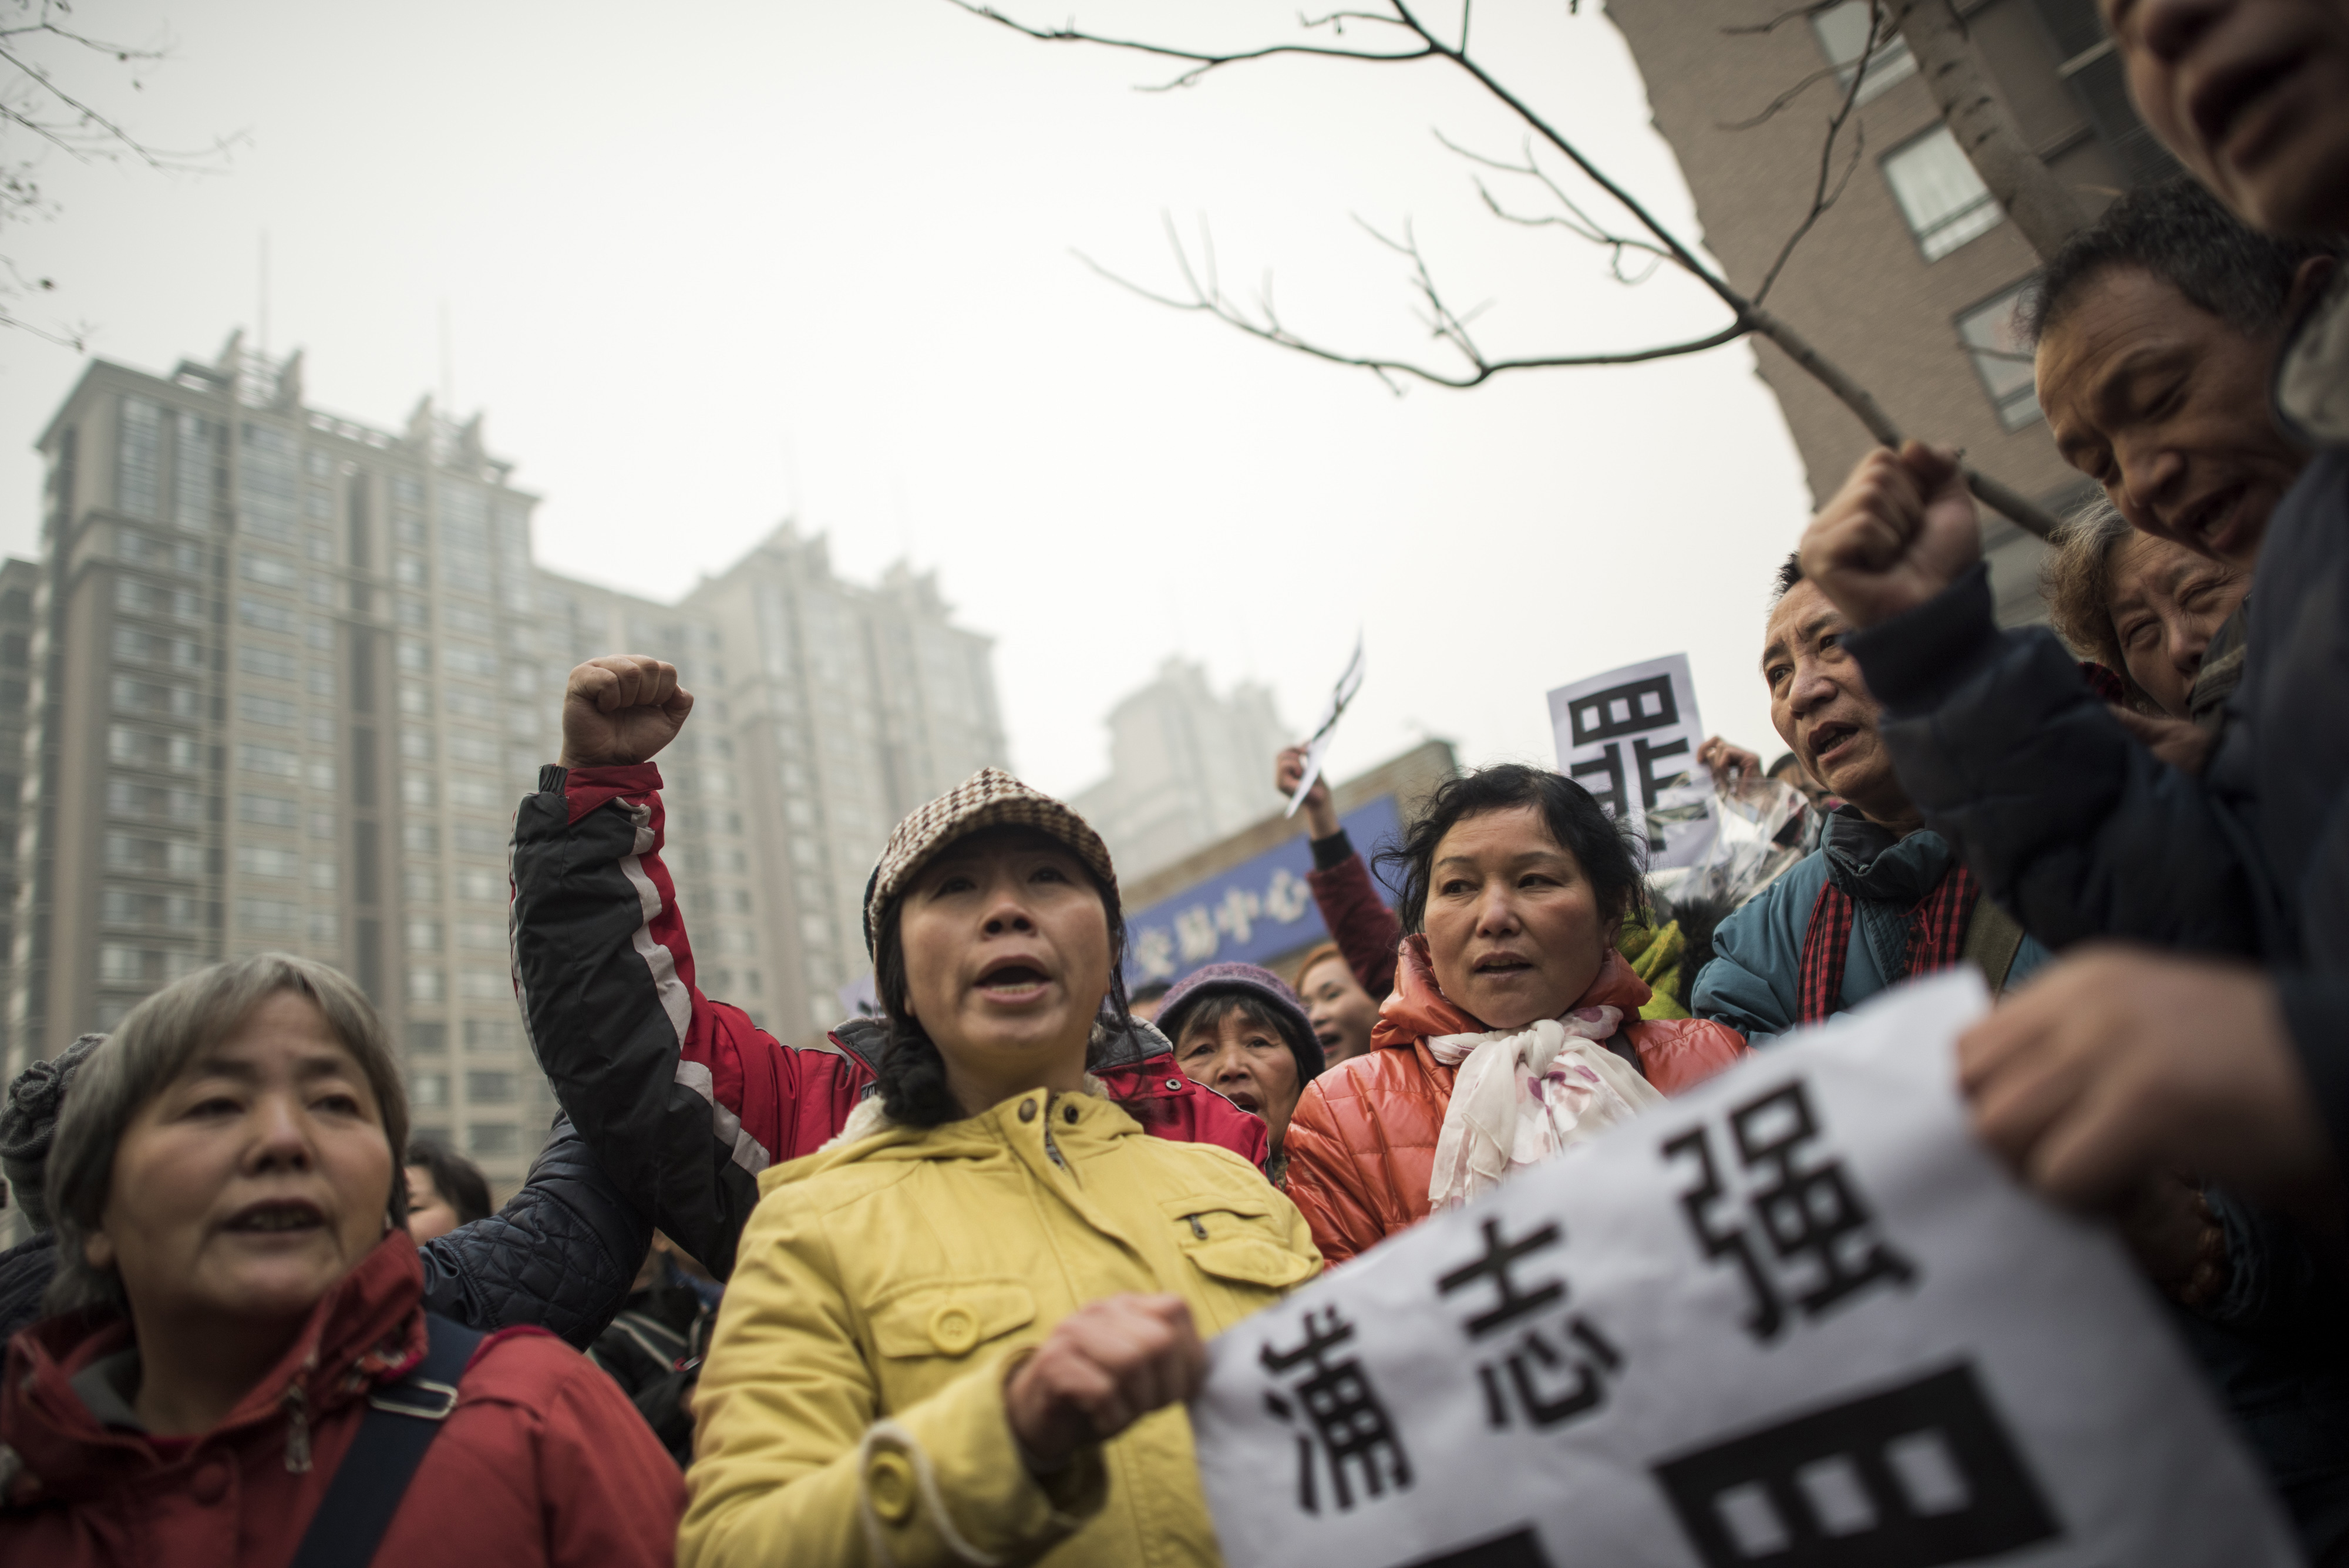 Supporters of human-rights lawyer Pu Zhiqiang hold a placard that reads "Pu Zhiqiang, Innocent" during a demonstration near the Beijing No. 2 Intermediate People's Court in Beijing on Dec. 14, 2015 (Fred Dufour—AFP/Getty Images)